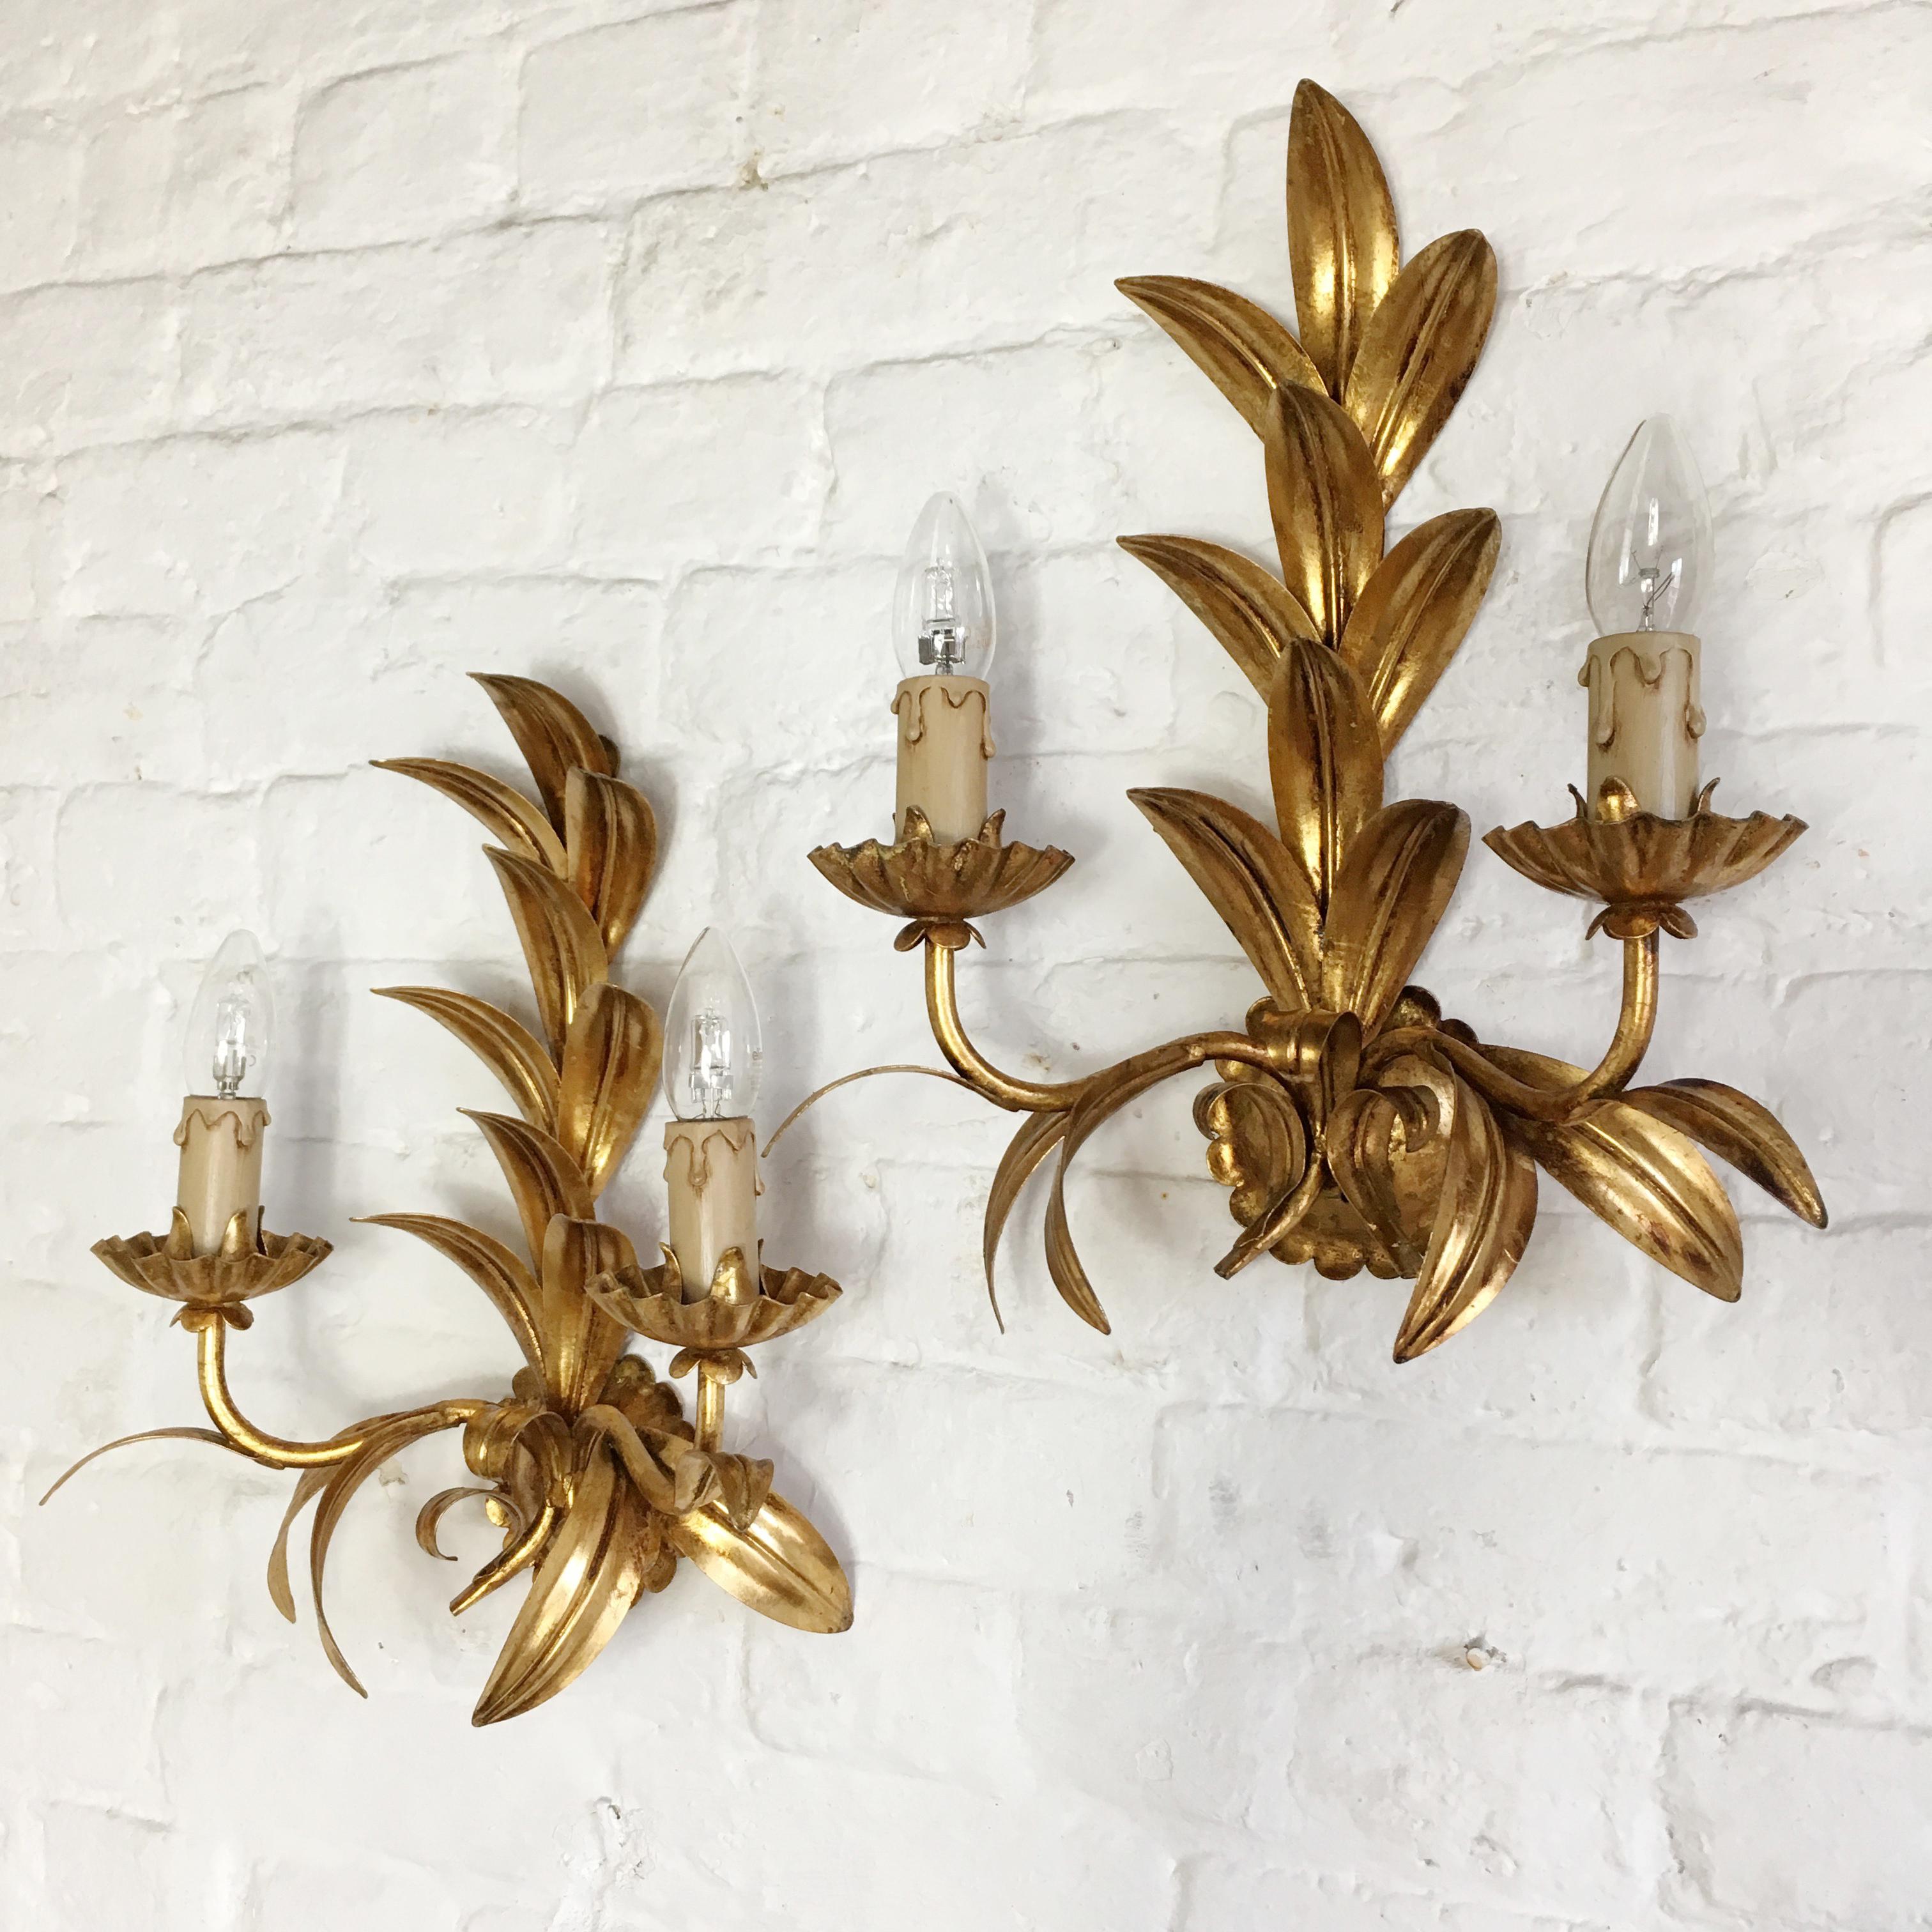 A pair of gilt Hans Kogl leaf wall sconces. Scalloped back plate with beautiful leaf arrangement. The lights are wired and in full working order, but as with all our lighting we would always suggest they are fitted and tested by a qualified